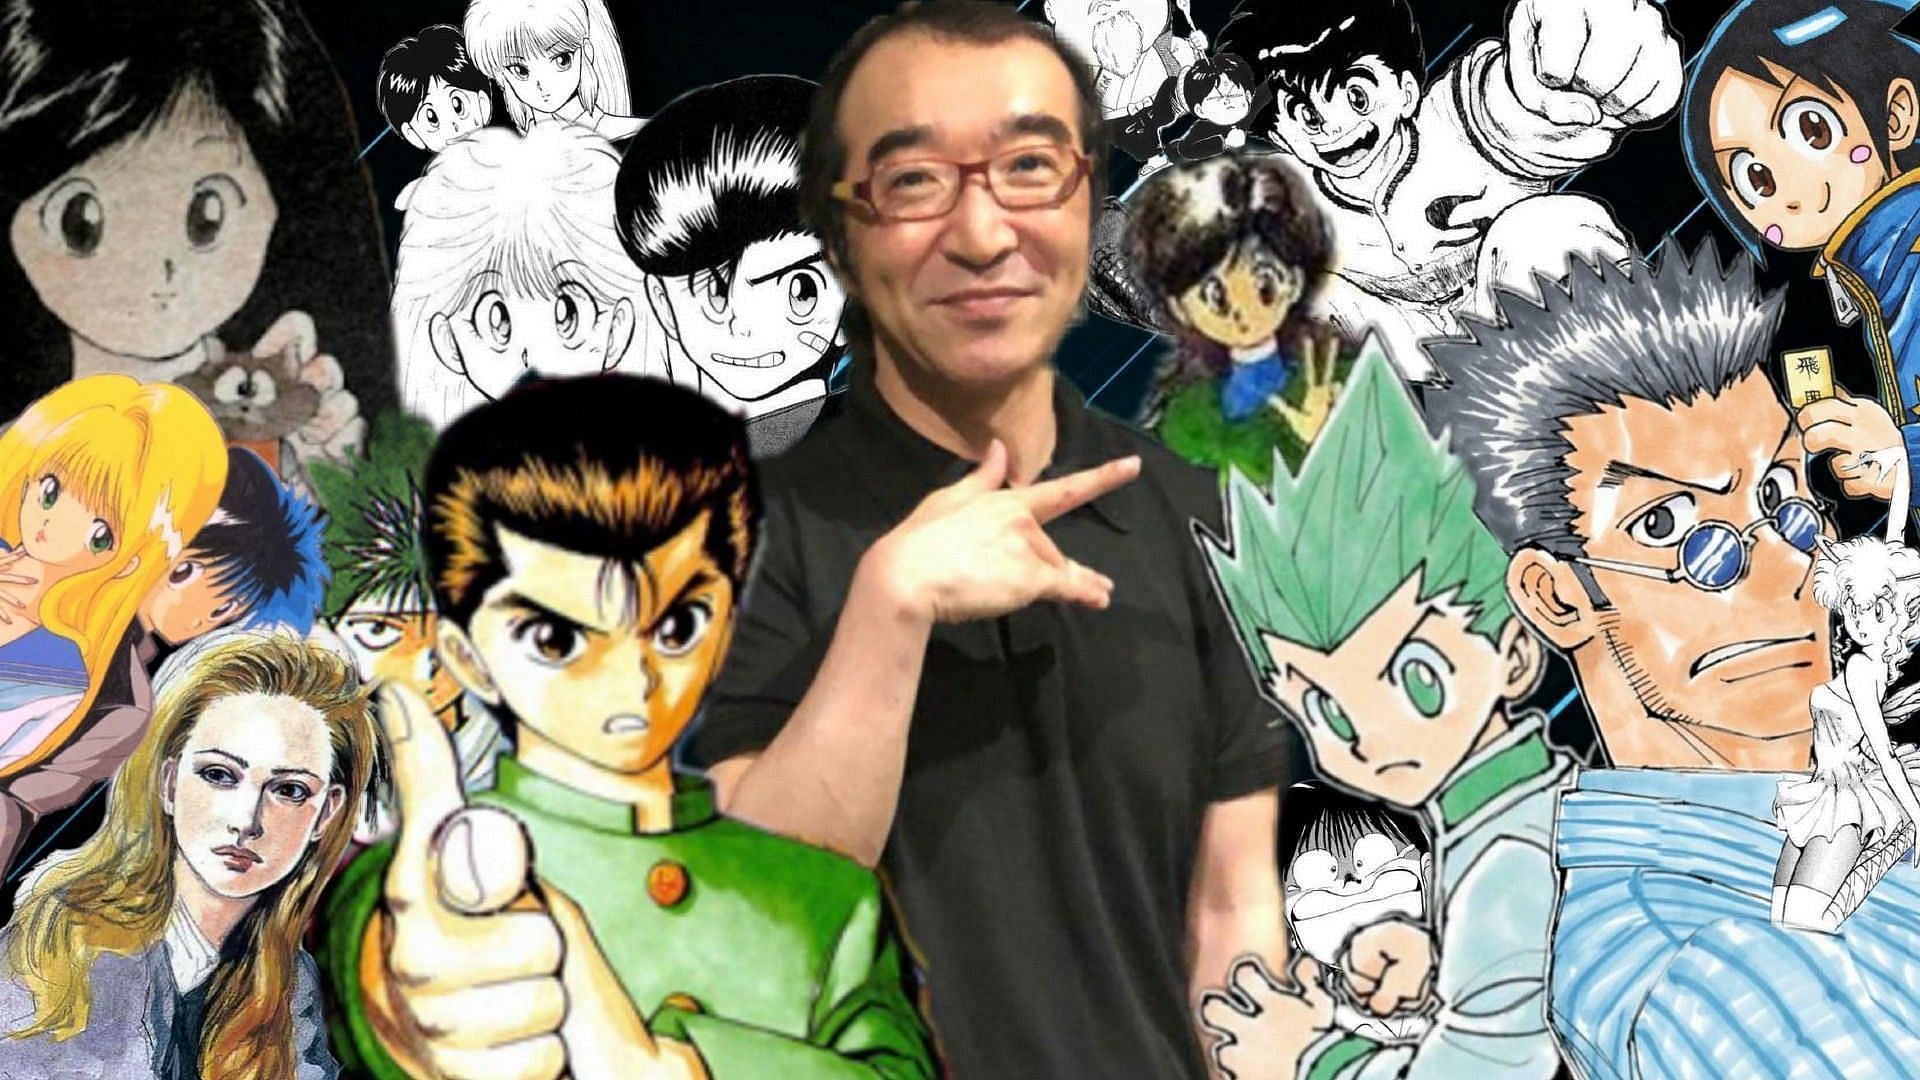 Hunter x Hunter creator has battled with health issues for a long time (Image via Sportskeeda)